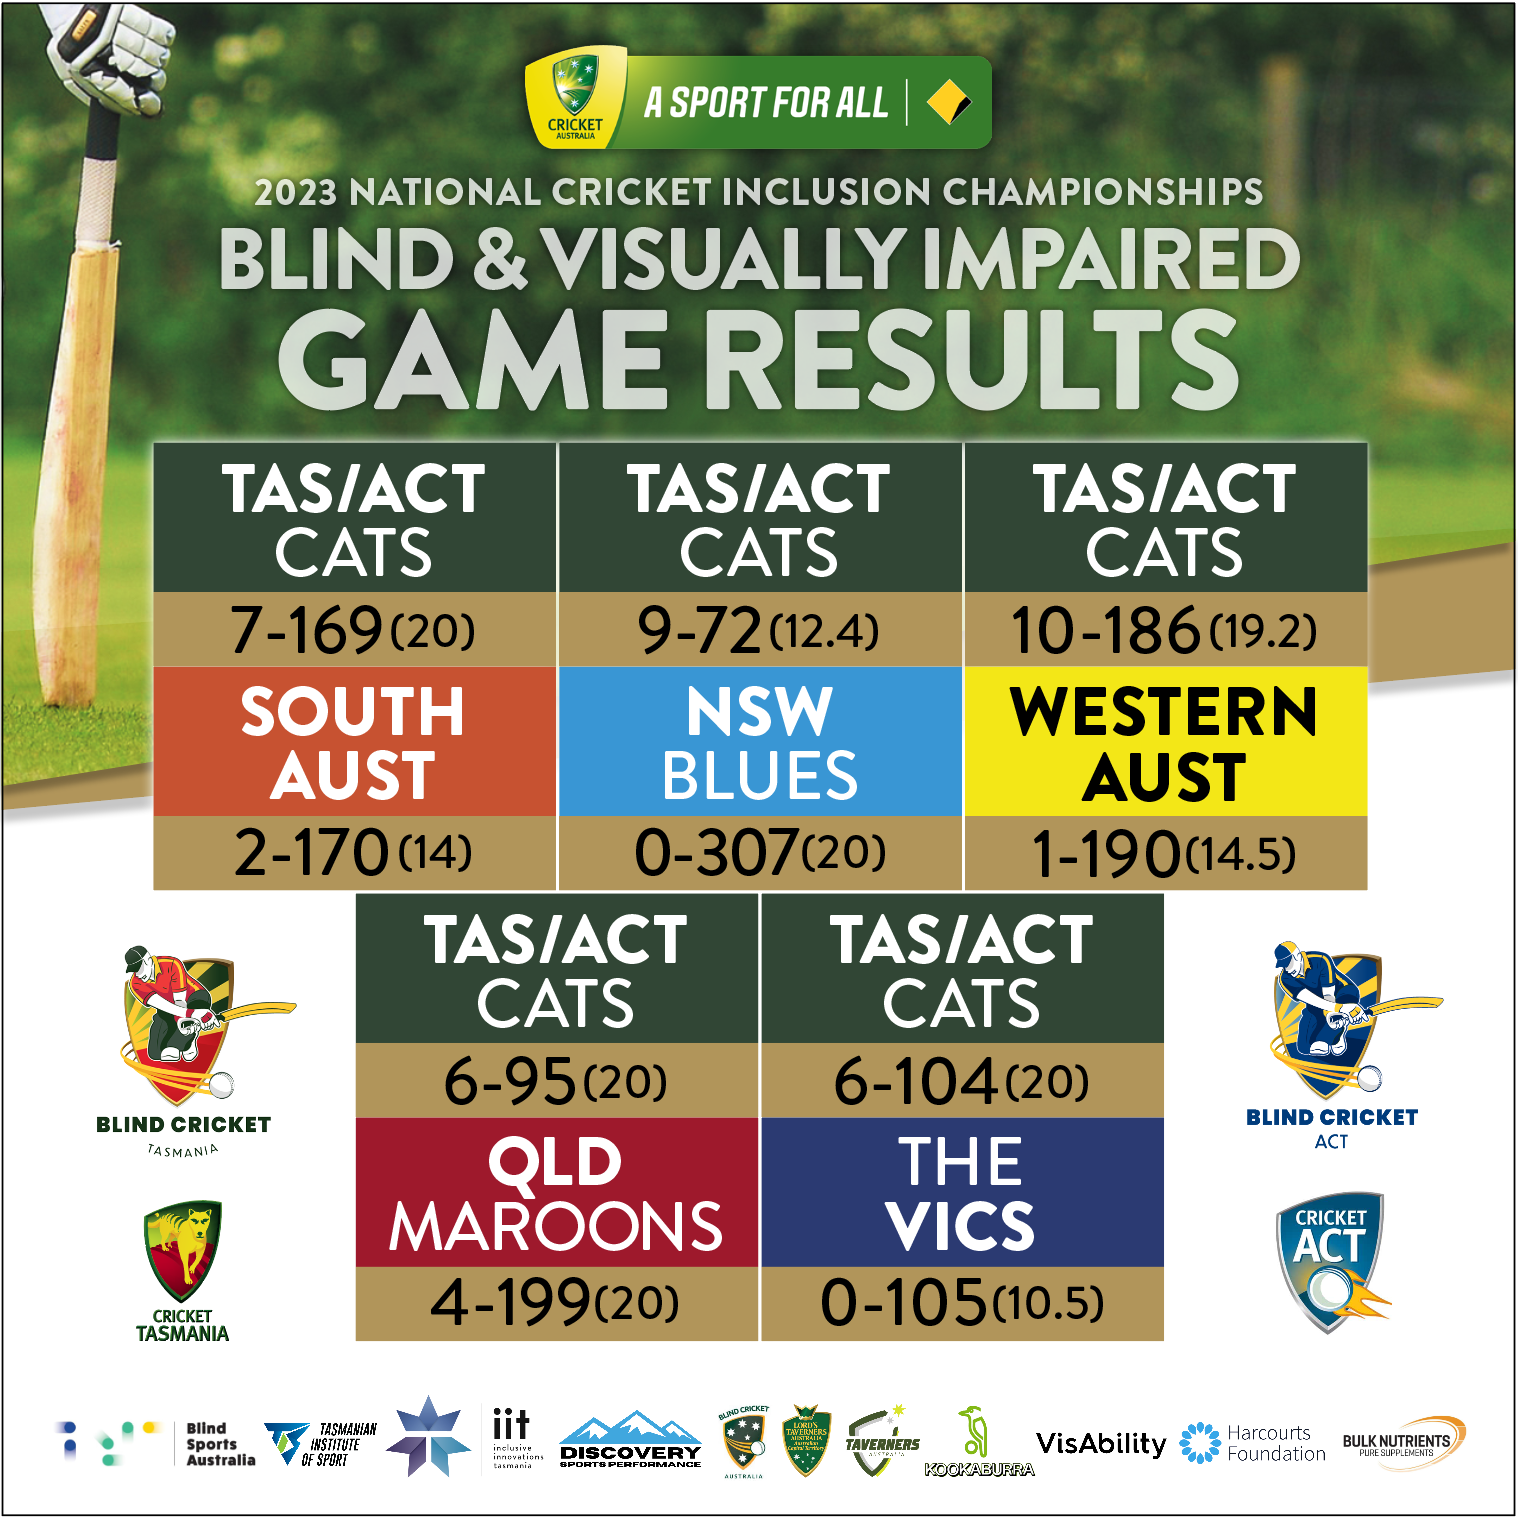 The TAS/ACT CATS team NCIC game results